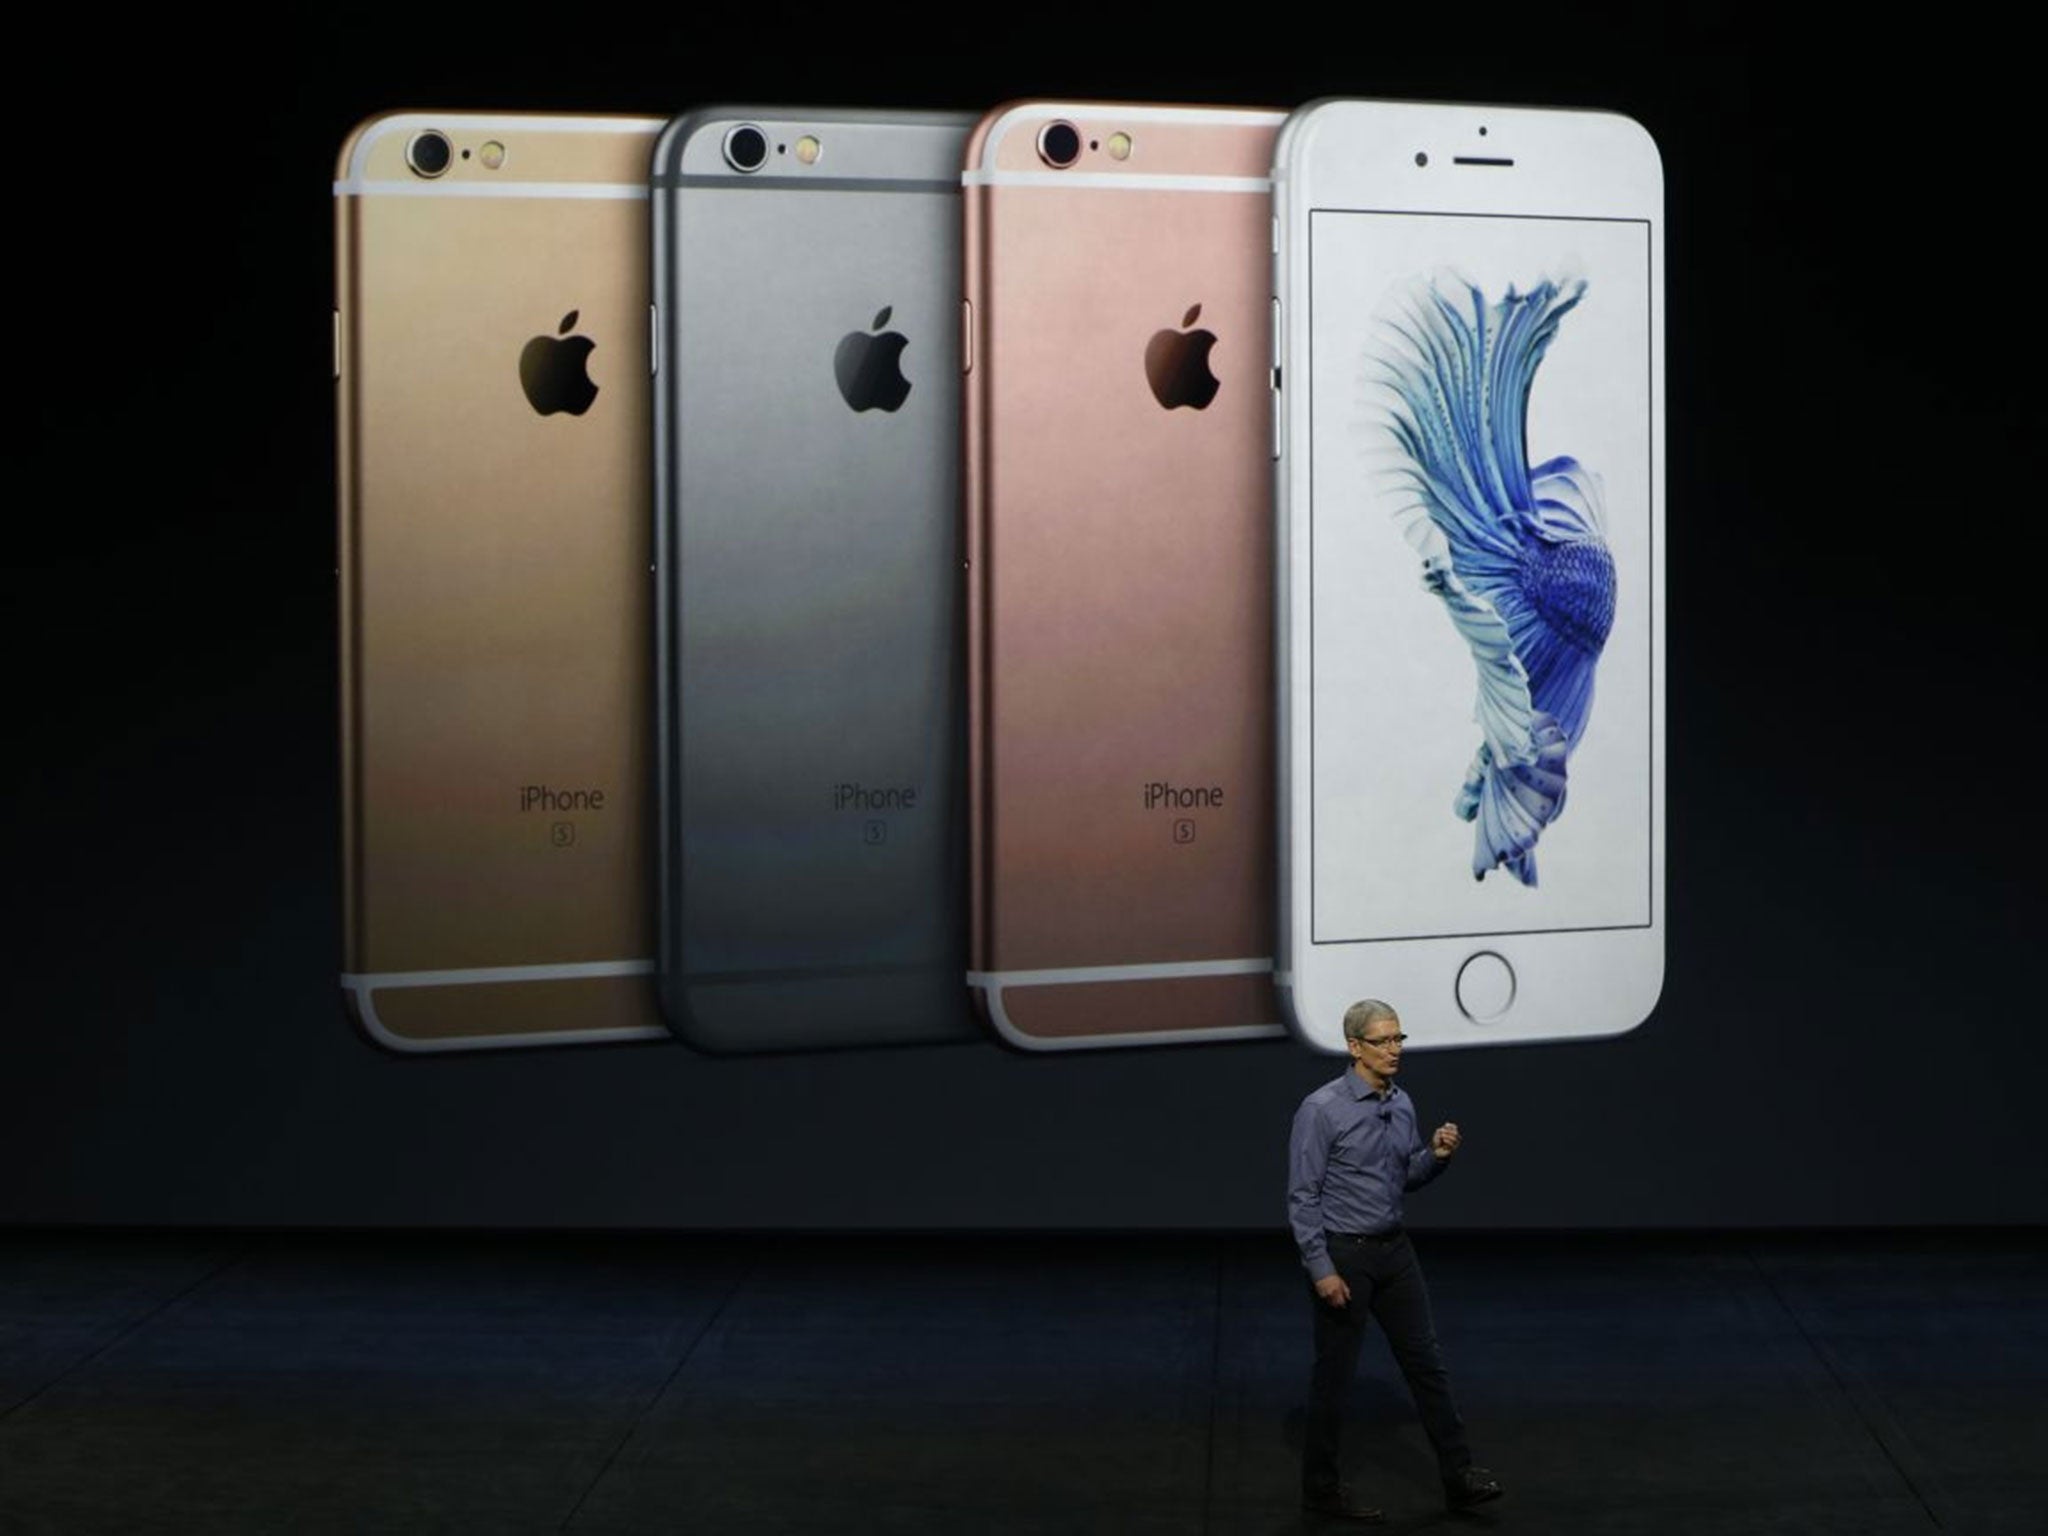 Apple CEO Tim Cook speaks about the new iPhone 6S and 6S Plus at an Apple launch event at the Bill Graham Civic Auditorium in San Francisco, California, USA, 09 September 2015. Media reports indicate a launch of updated iPhone models, updated iPads and a